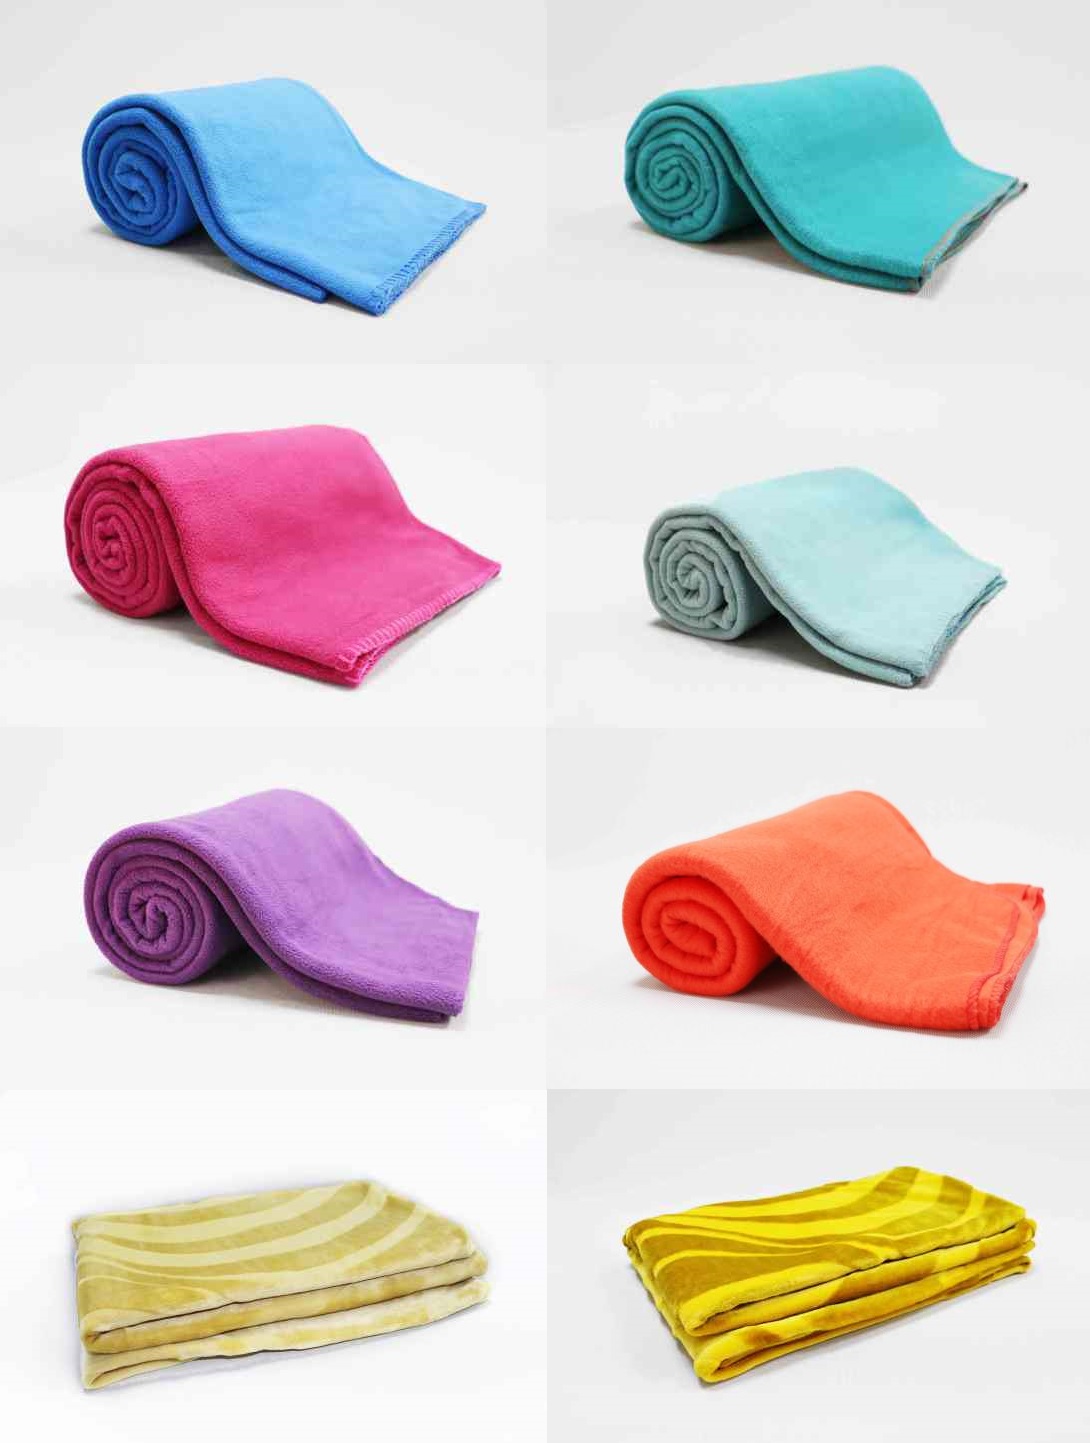 Airline blankets